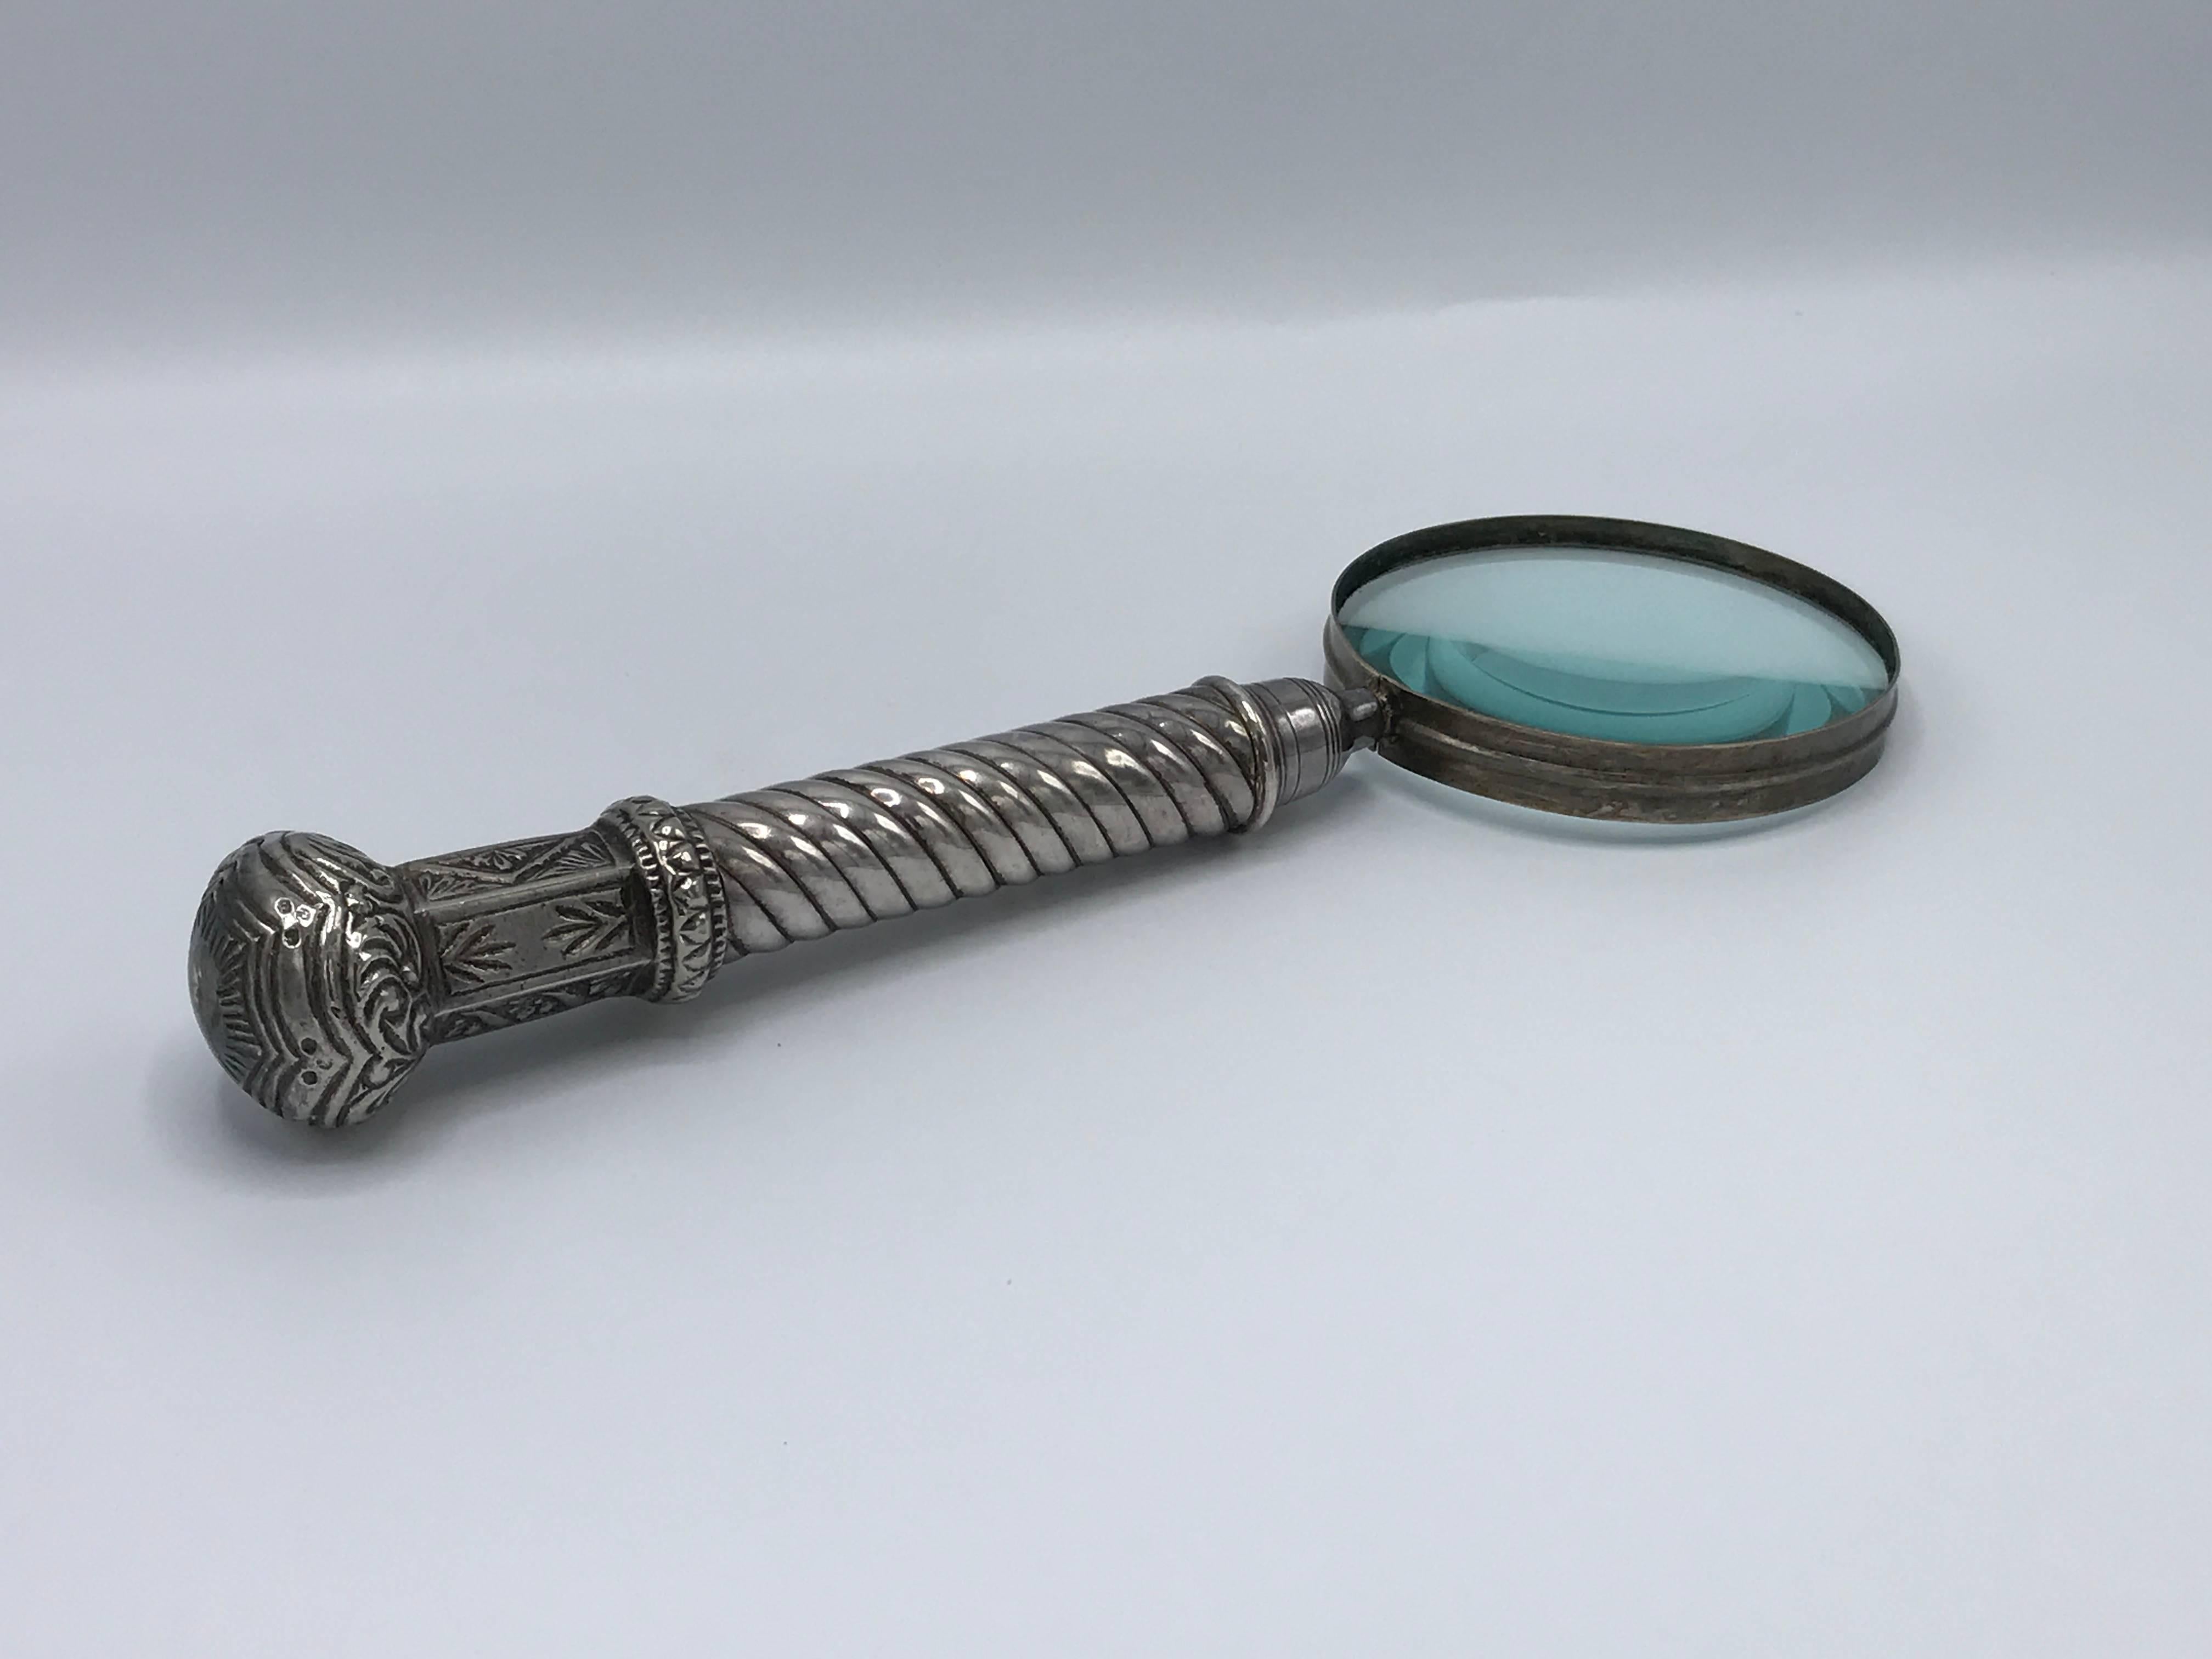 Offered is a gorgeous, 19th century silver plated magnifying glass. Weighted with detailing along the handle.